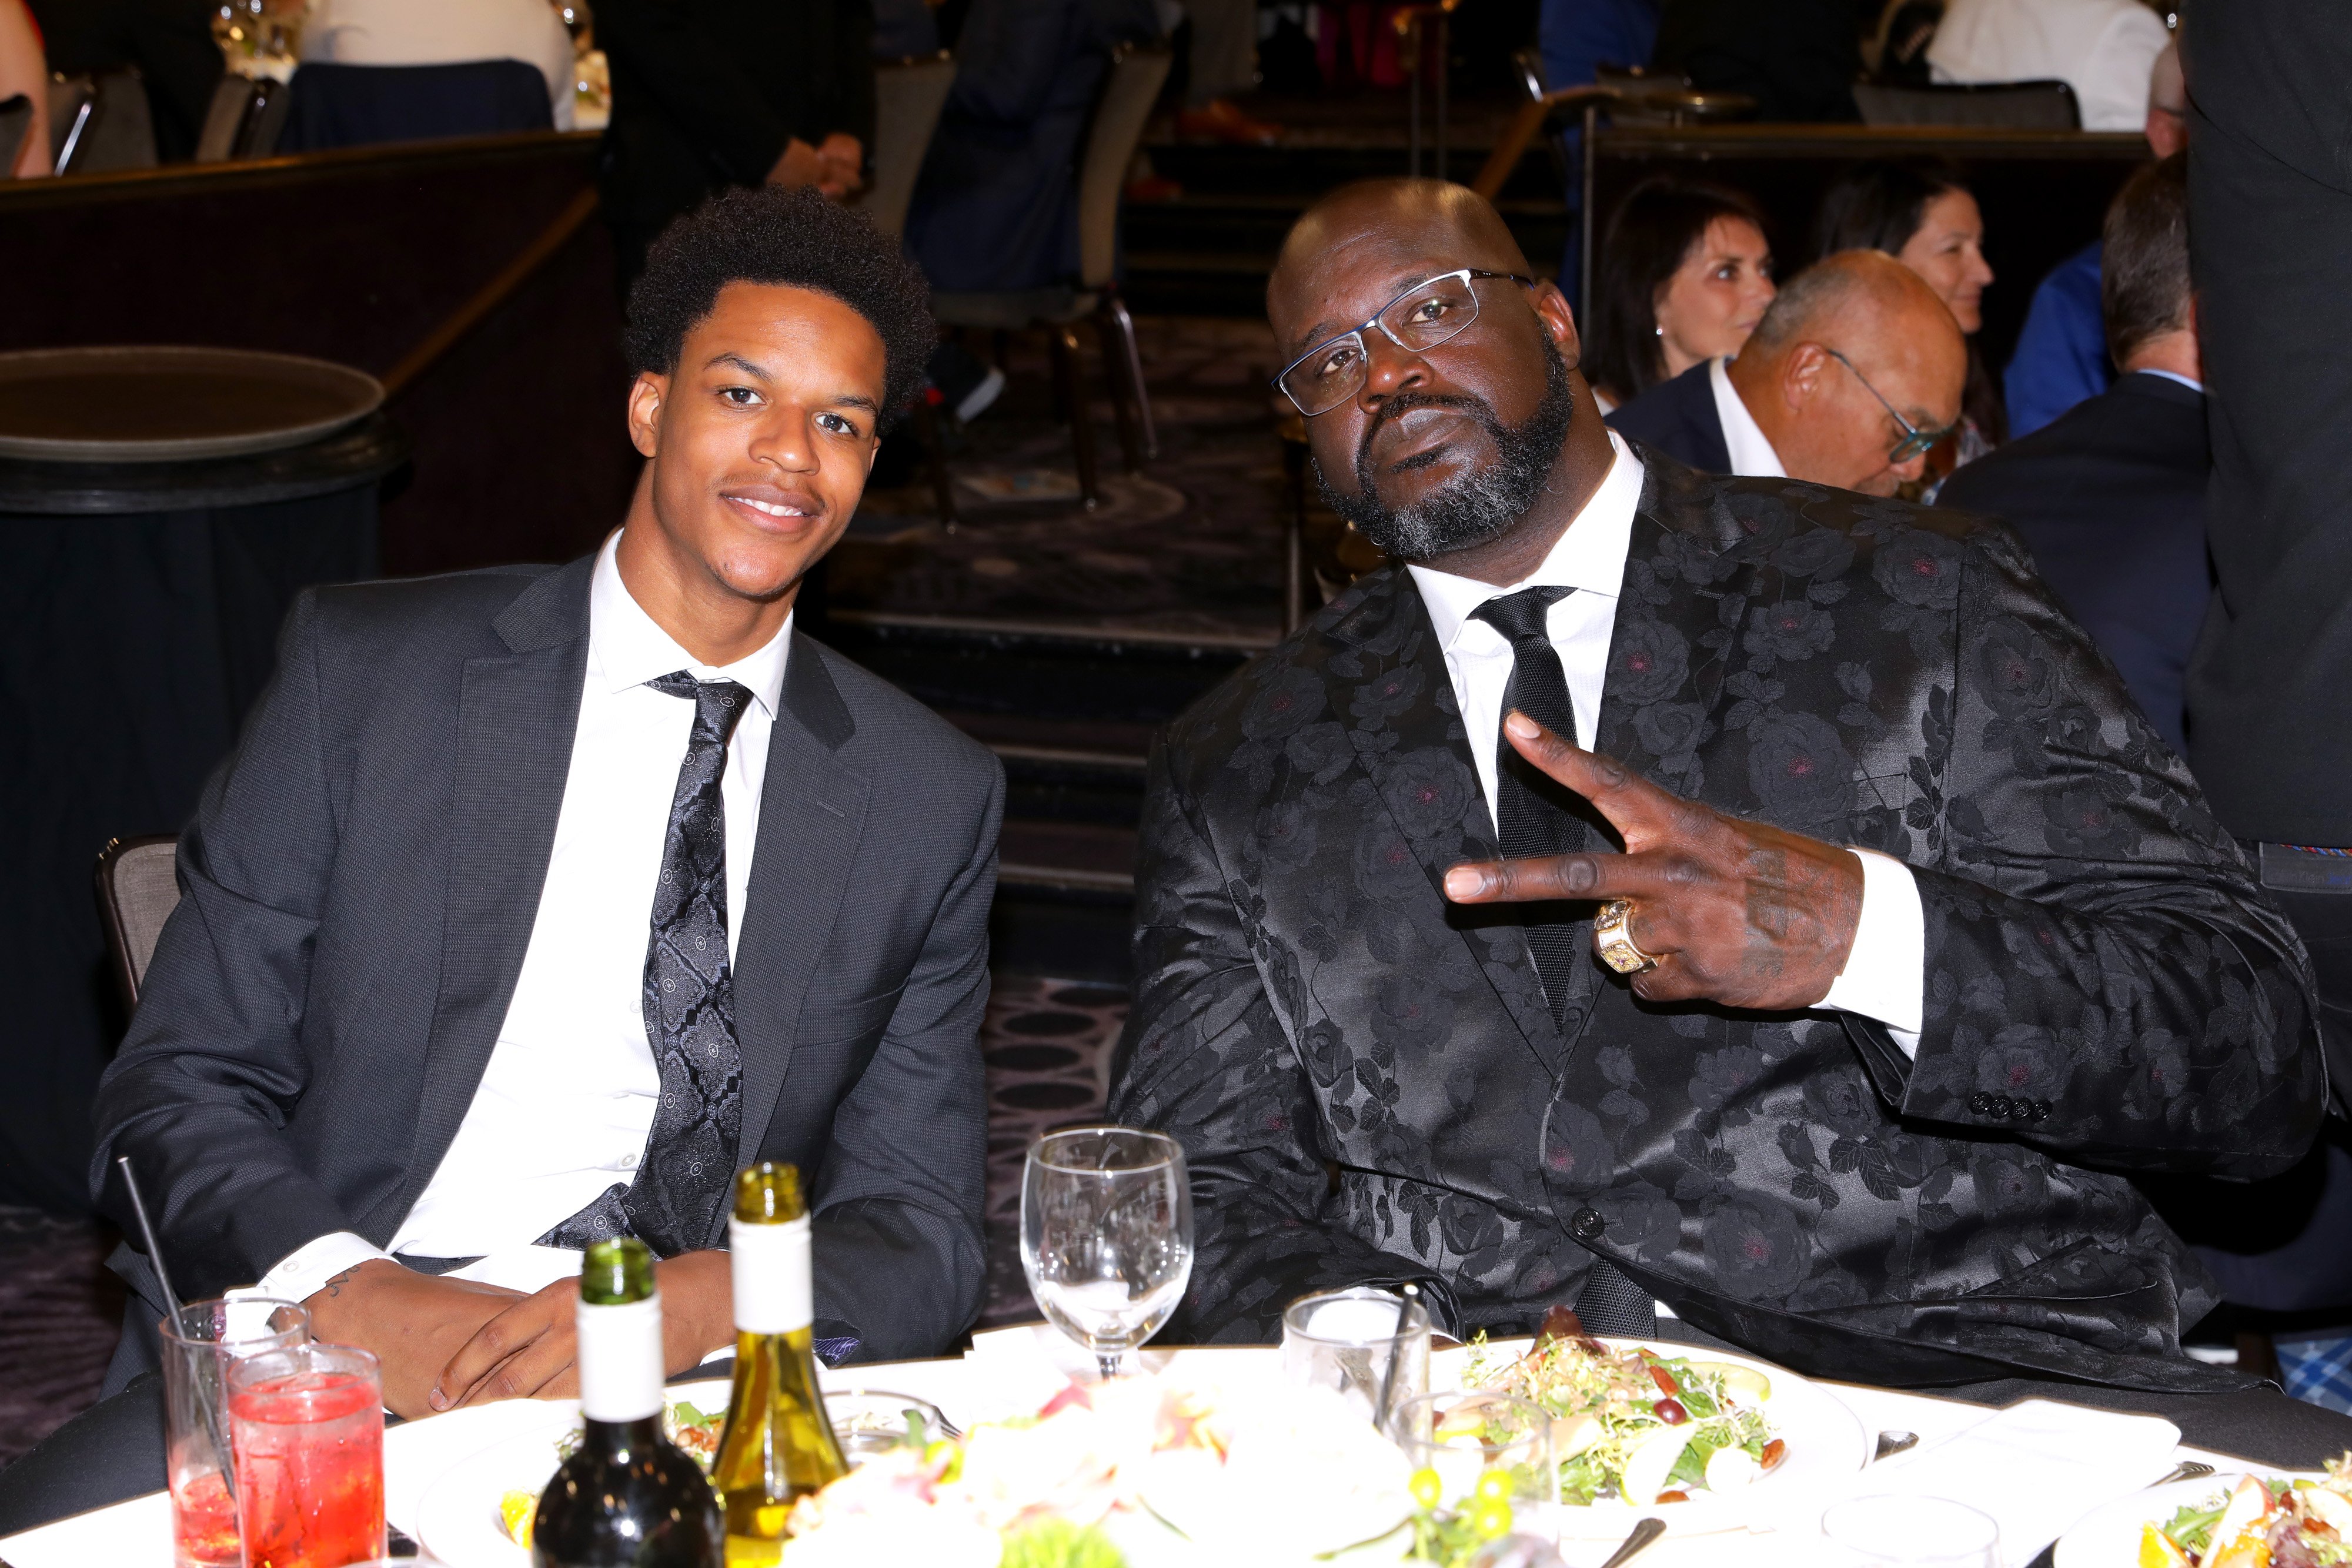 Shareef O'Neal and Shaquille O'Neal attend the 19th Annual Harold and Carole Pump Foundation Gala at The Beverly Hilton Hotel on August 09, 2019 | Photo: GettyImages